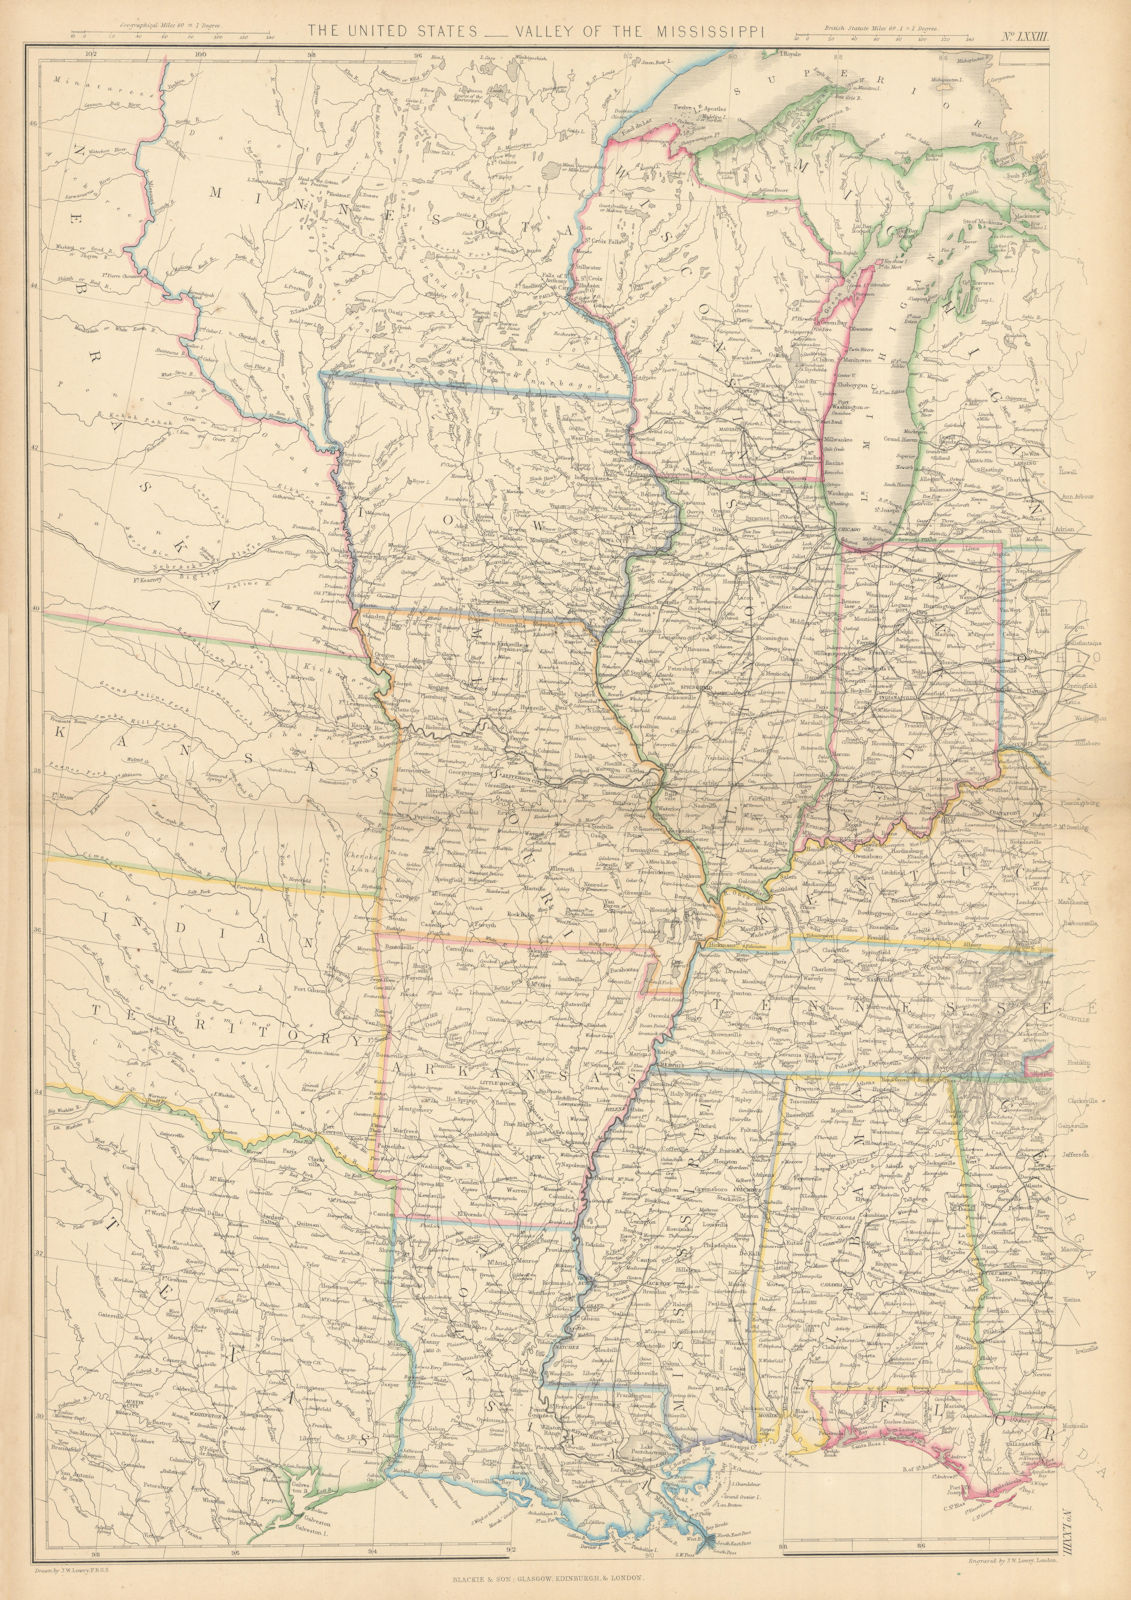 United States - Valley of the Mississippi by Joseph Wilson Lowry. USA 1859 map